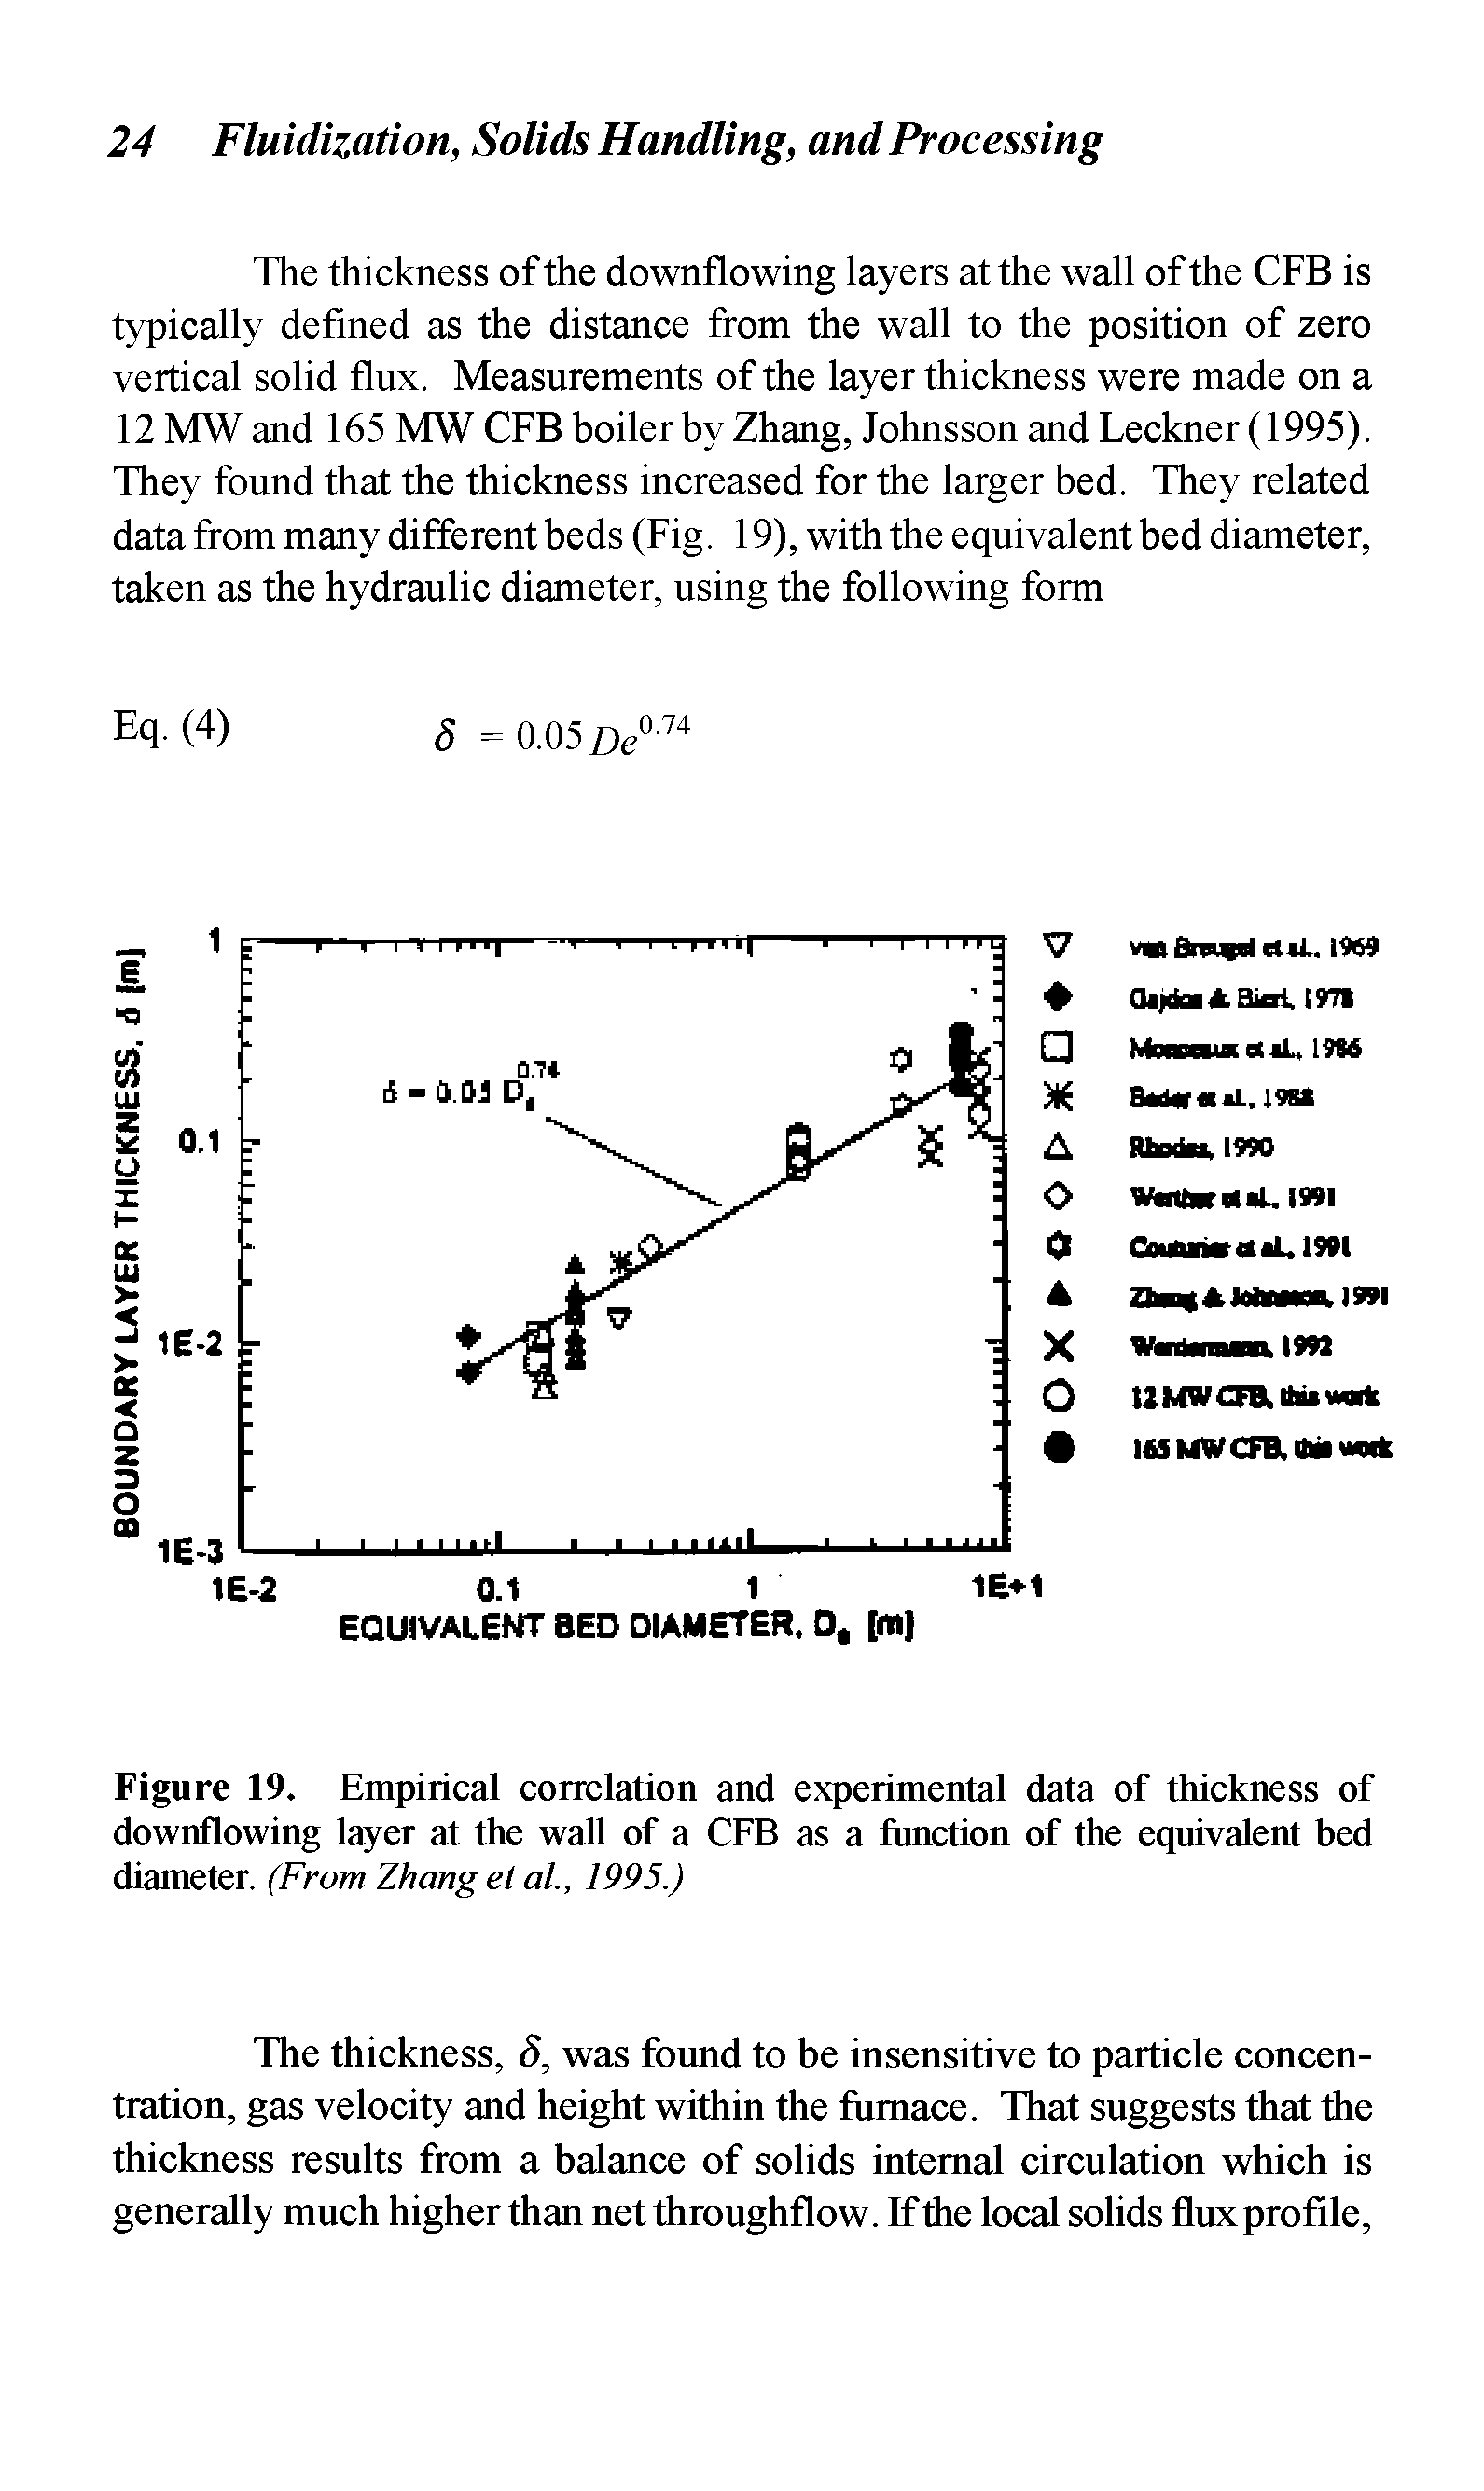 Figure 19. Empirical correlation and experimental data of thickness of downflowing layer at the wall of a CFB as a function of the equivalent bed diameter. (From Zhang etal., 1995.)...